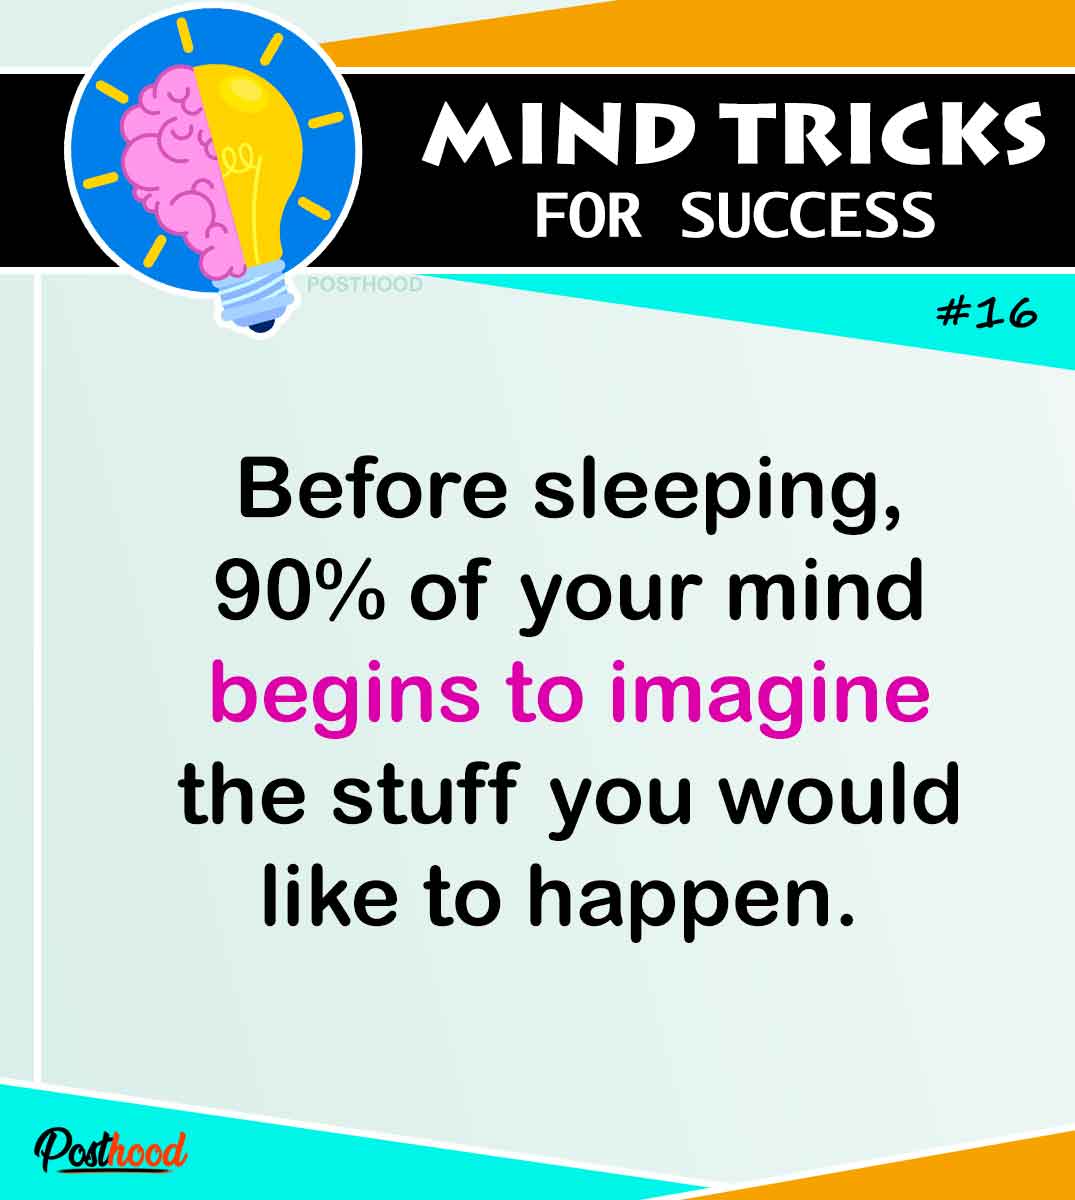 Train your mind to get a right mindset and positive attitude. Try these amazing mind tricking hacks for success and achieving goals.